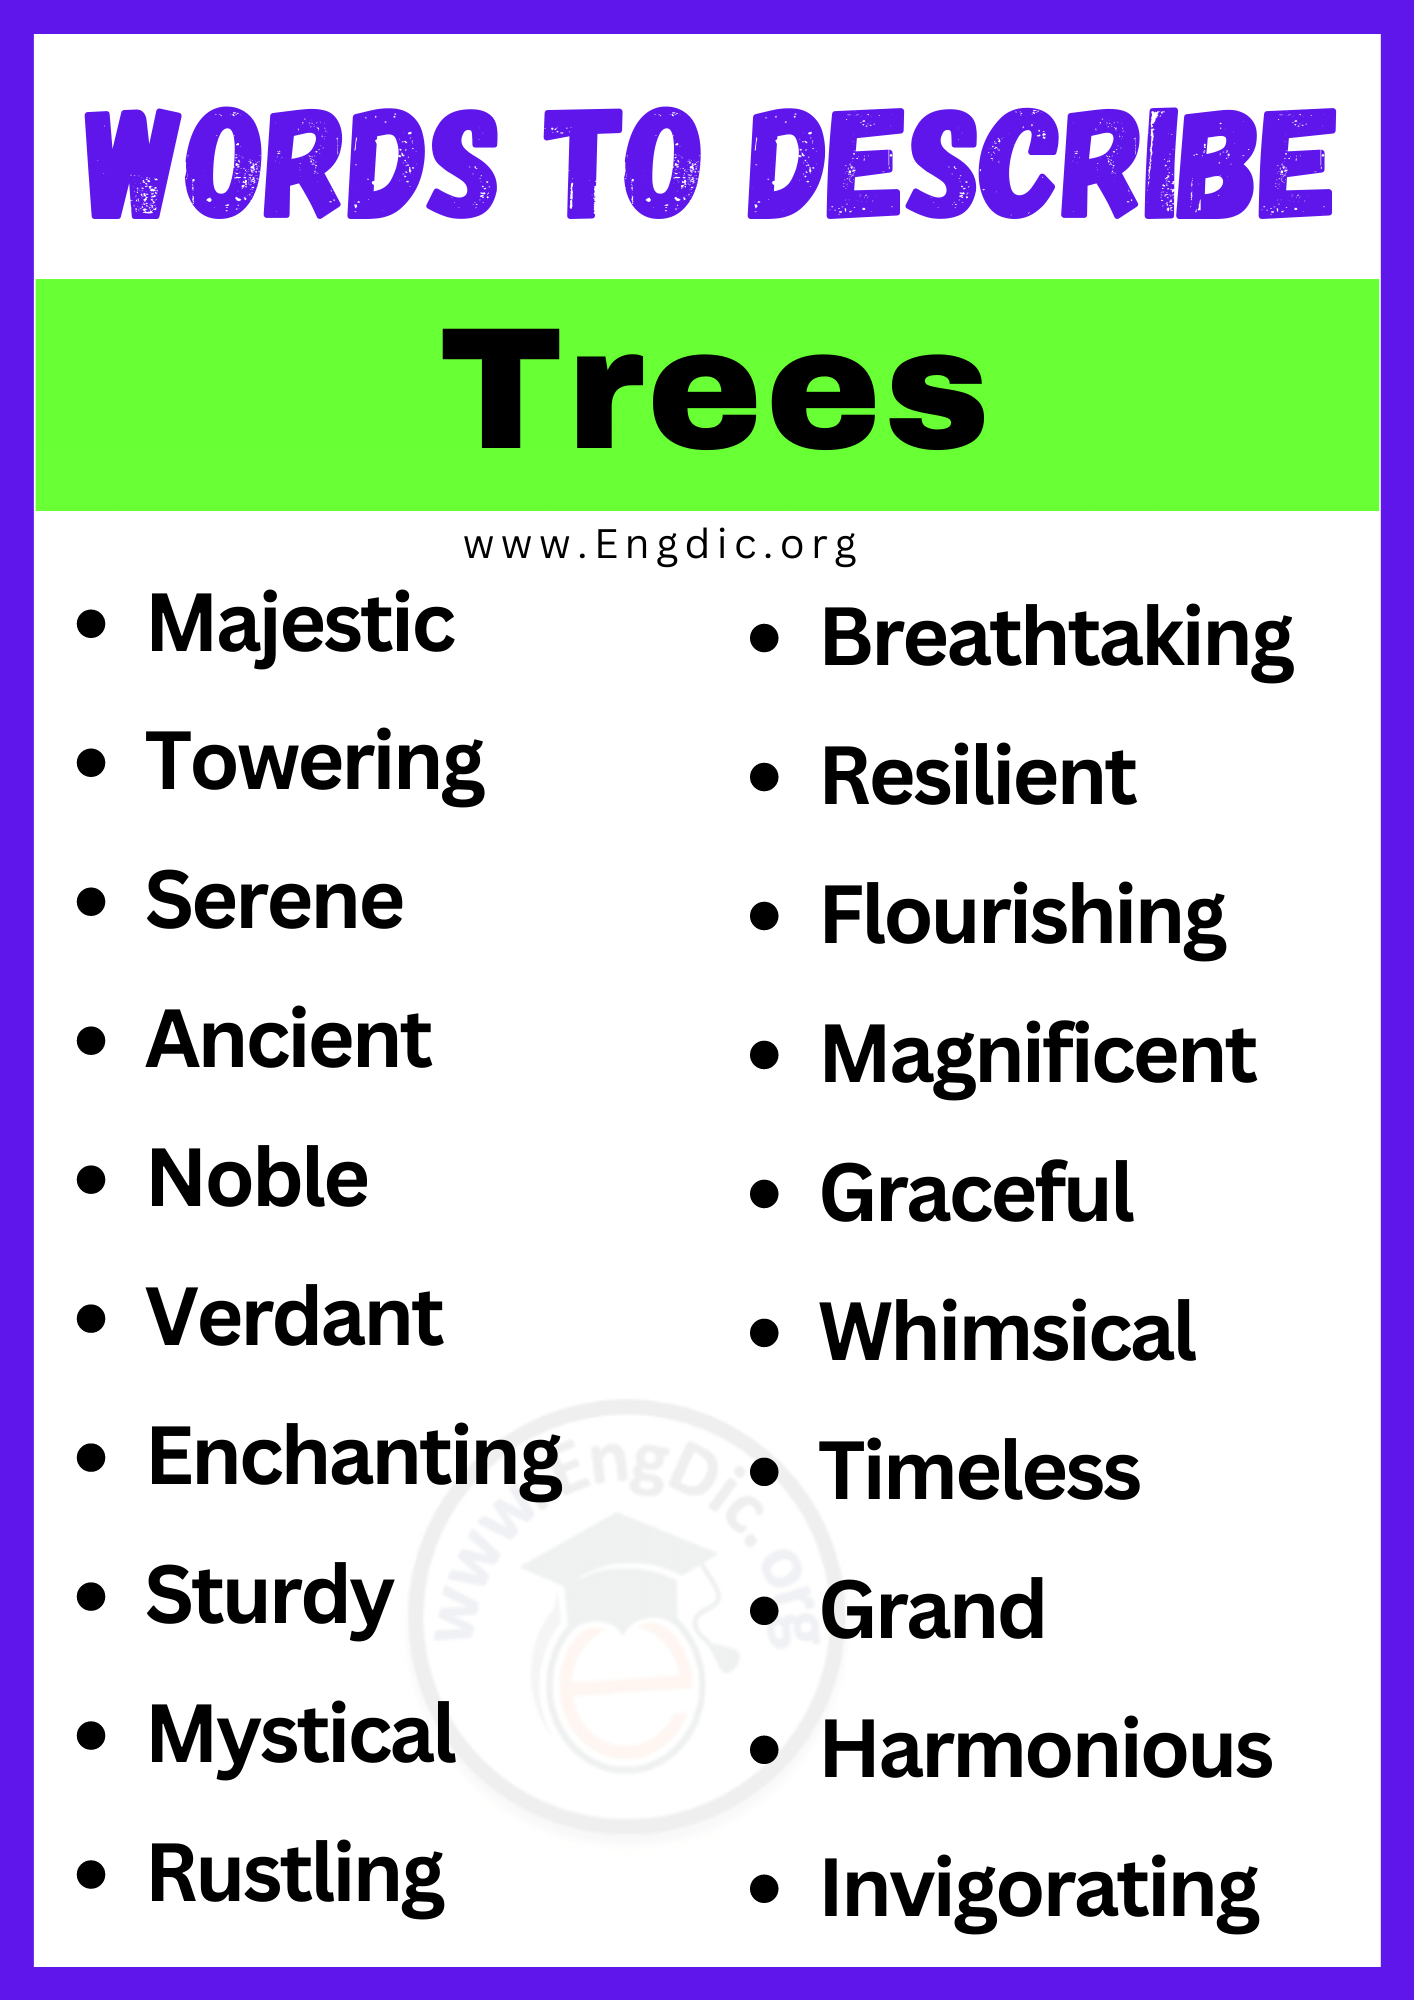 how to describe trees moving in the wind creative writing